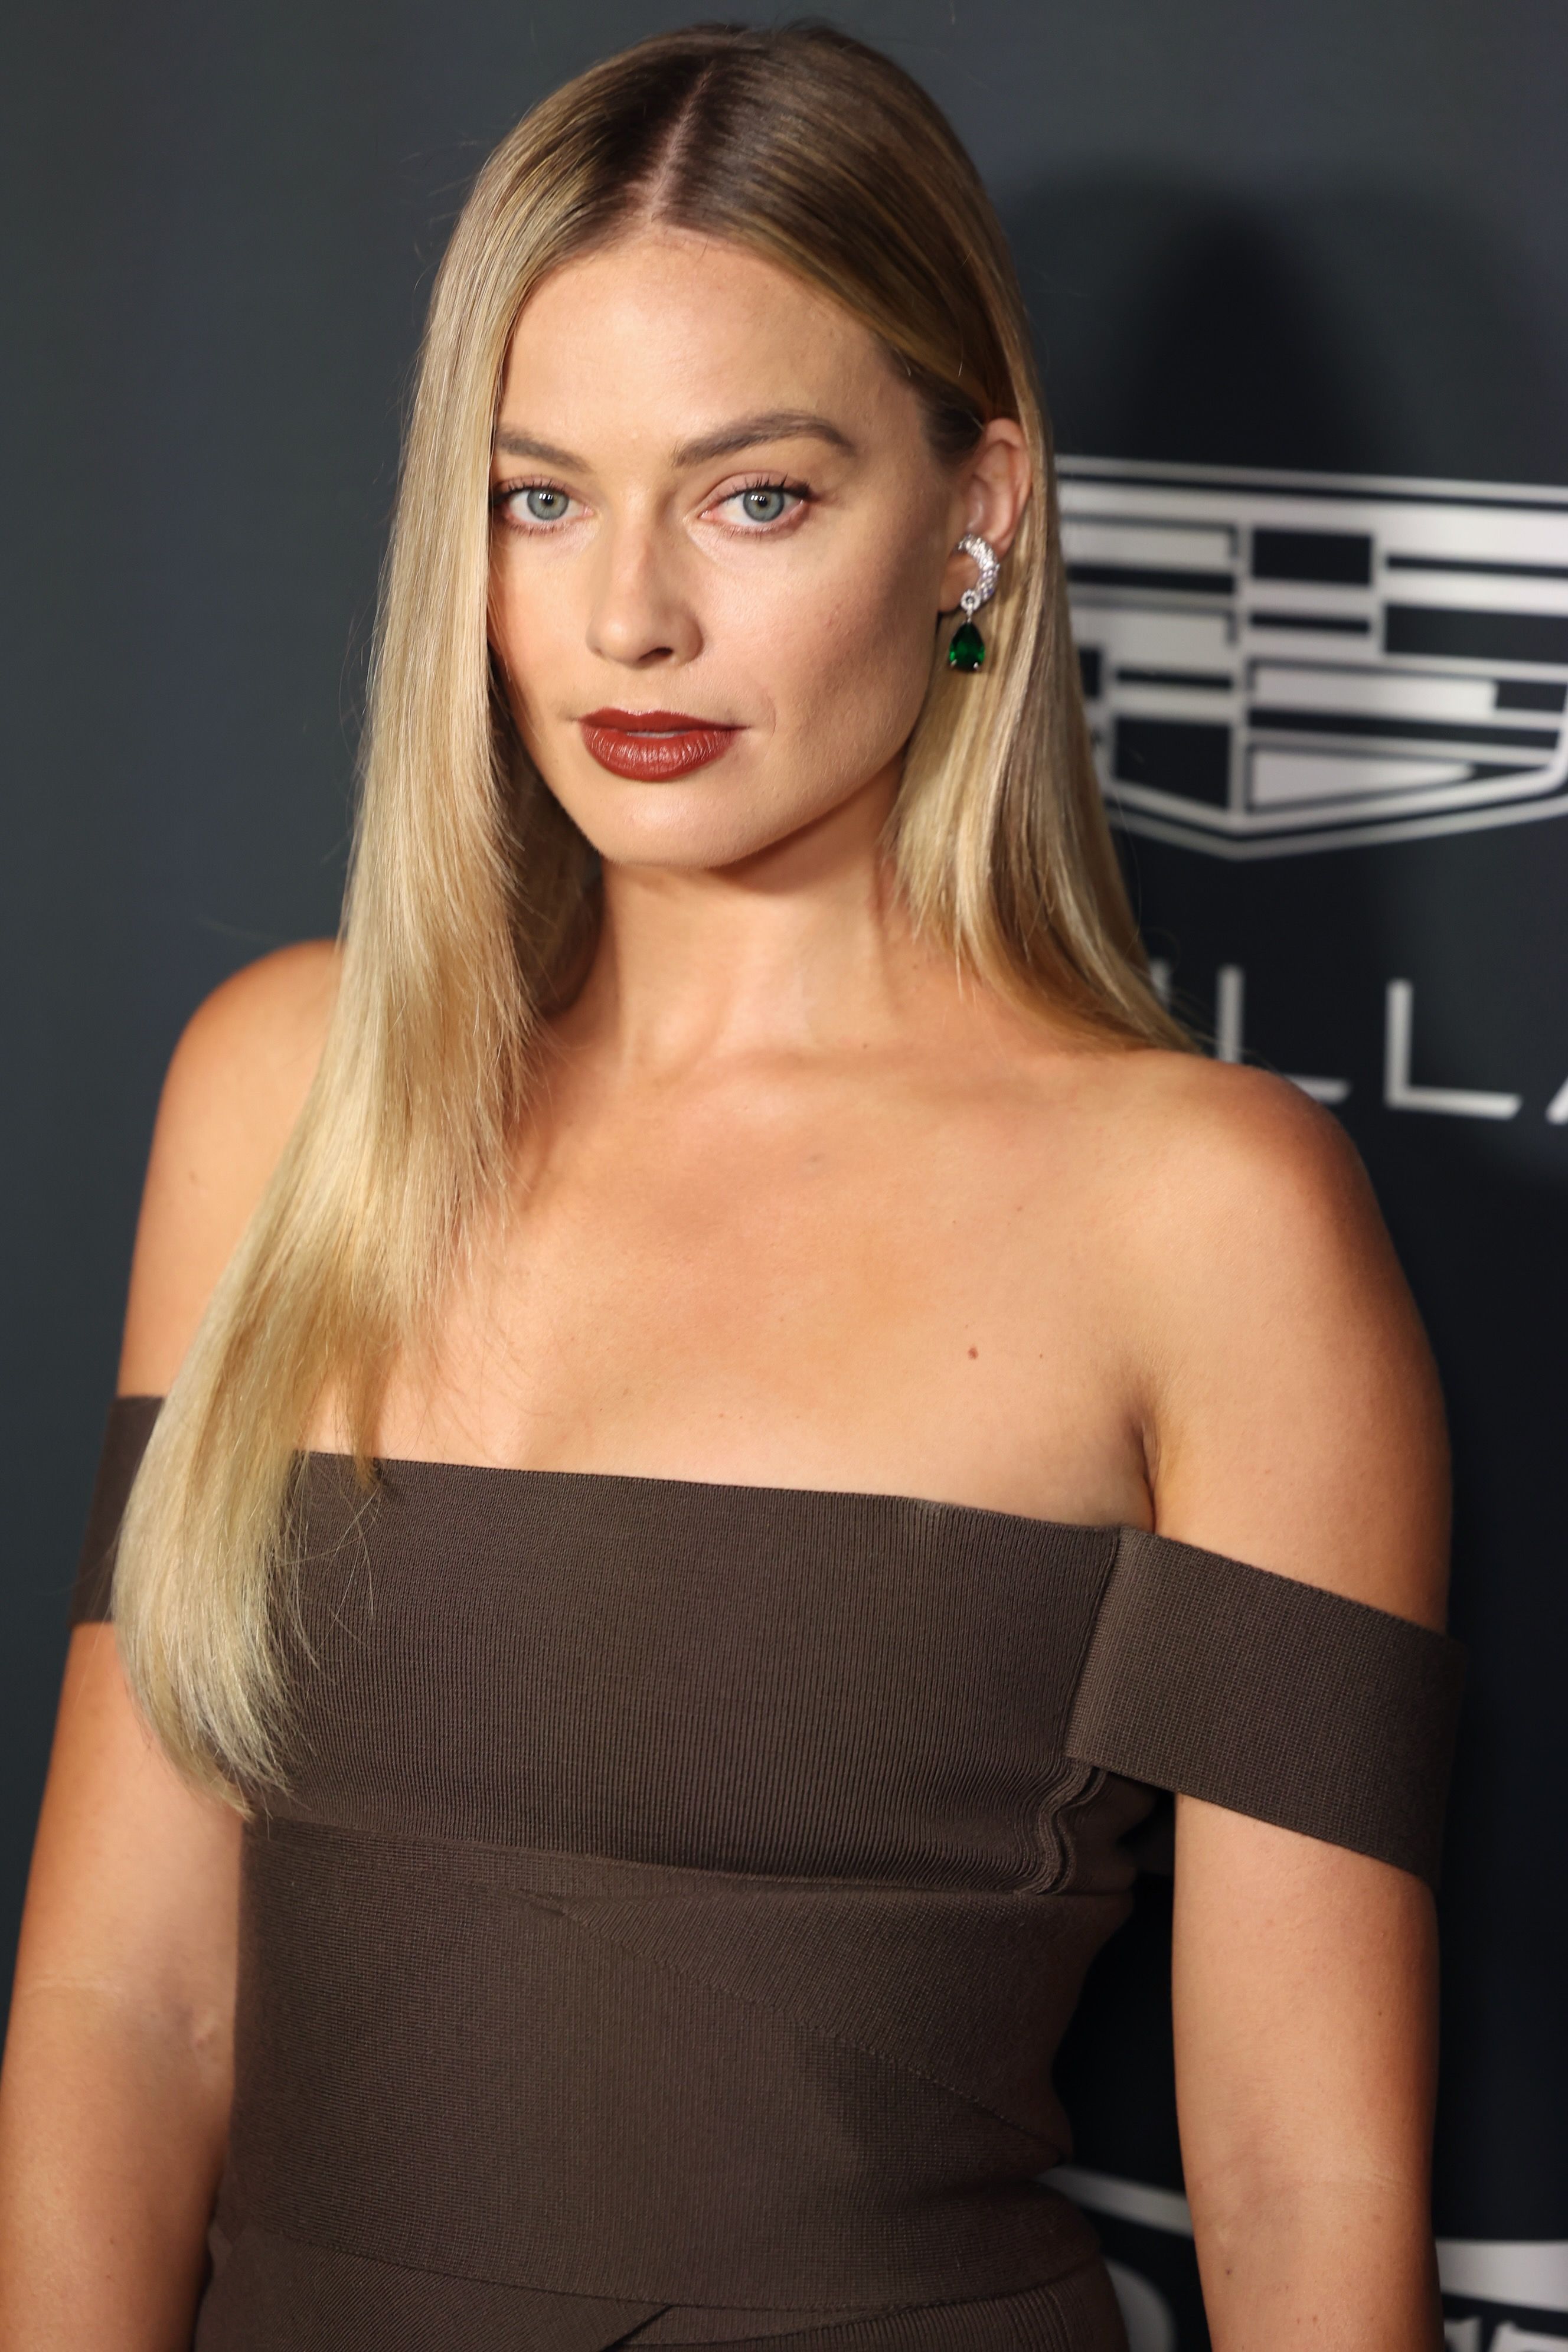 Margot Robbie's 'curve haircut' layers are so glass-like